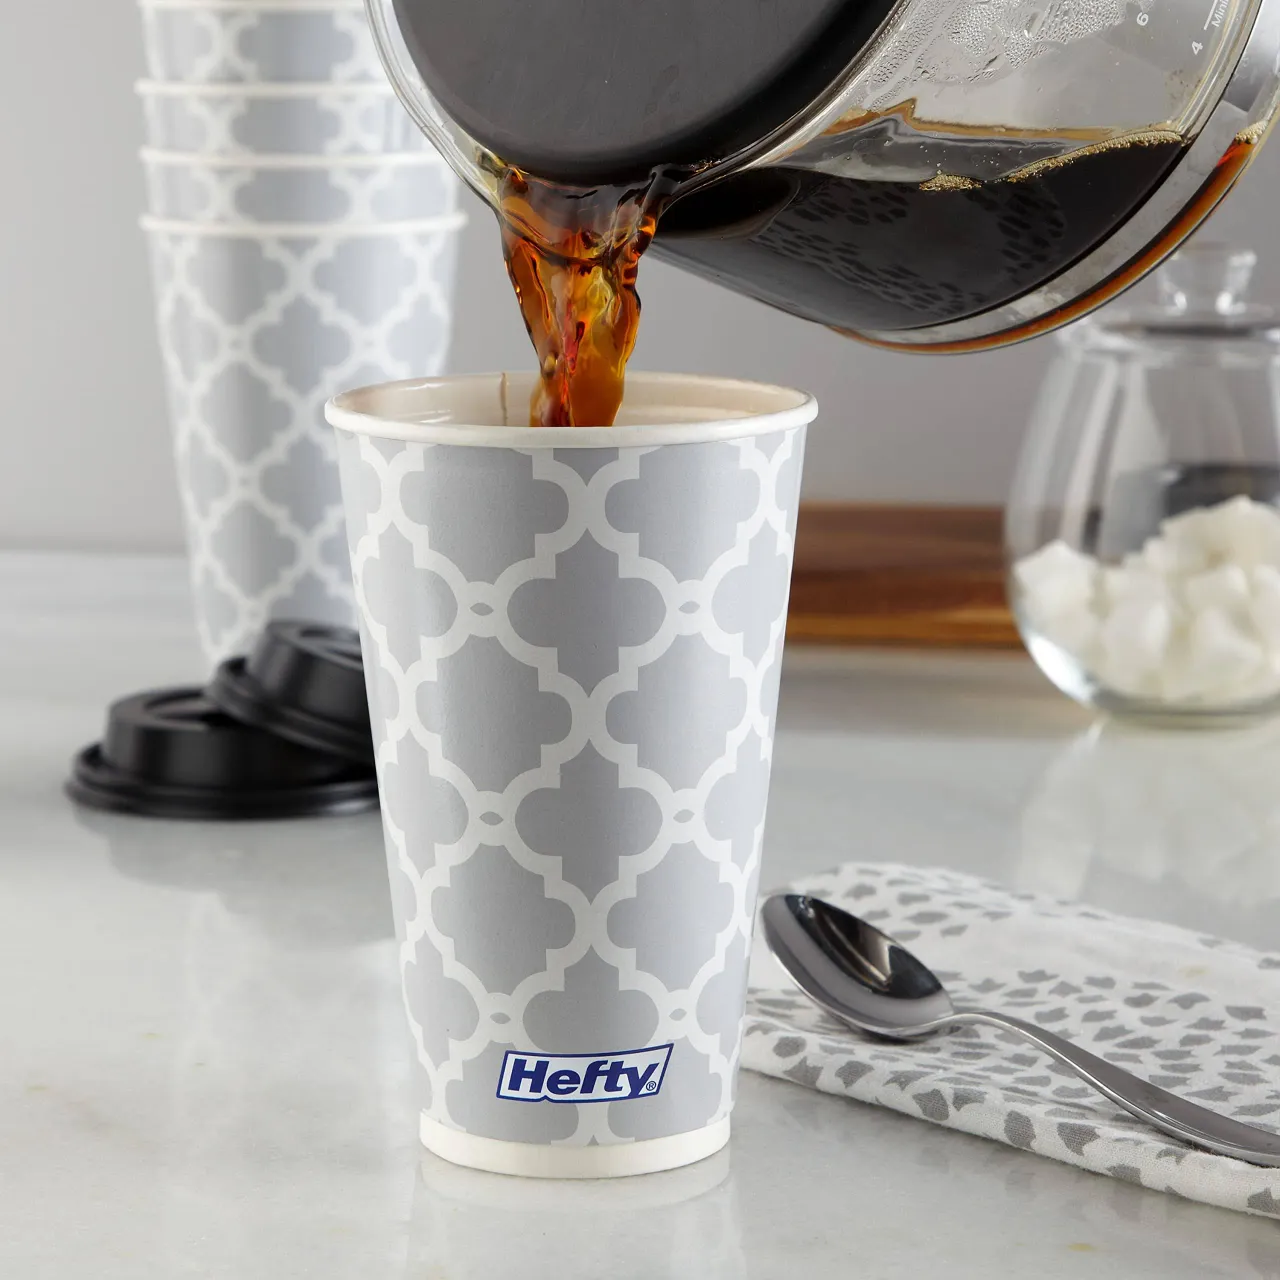 3 Hefty Paper Disposable Hot Cups with Lids, 16 Ounce, 20 Count